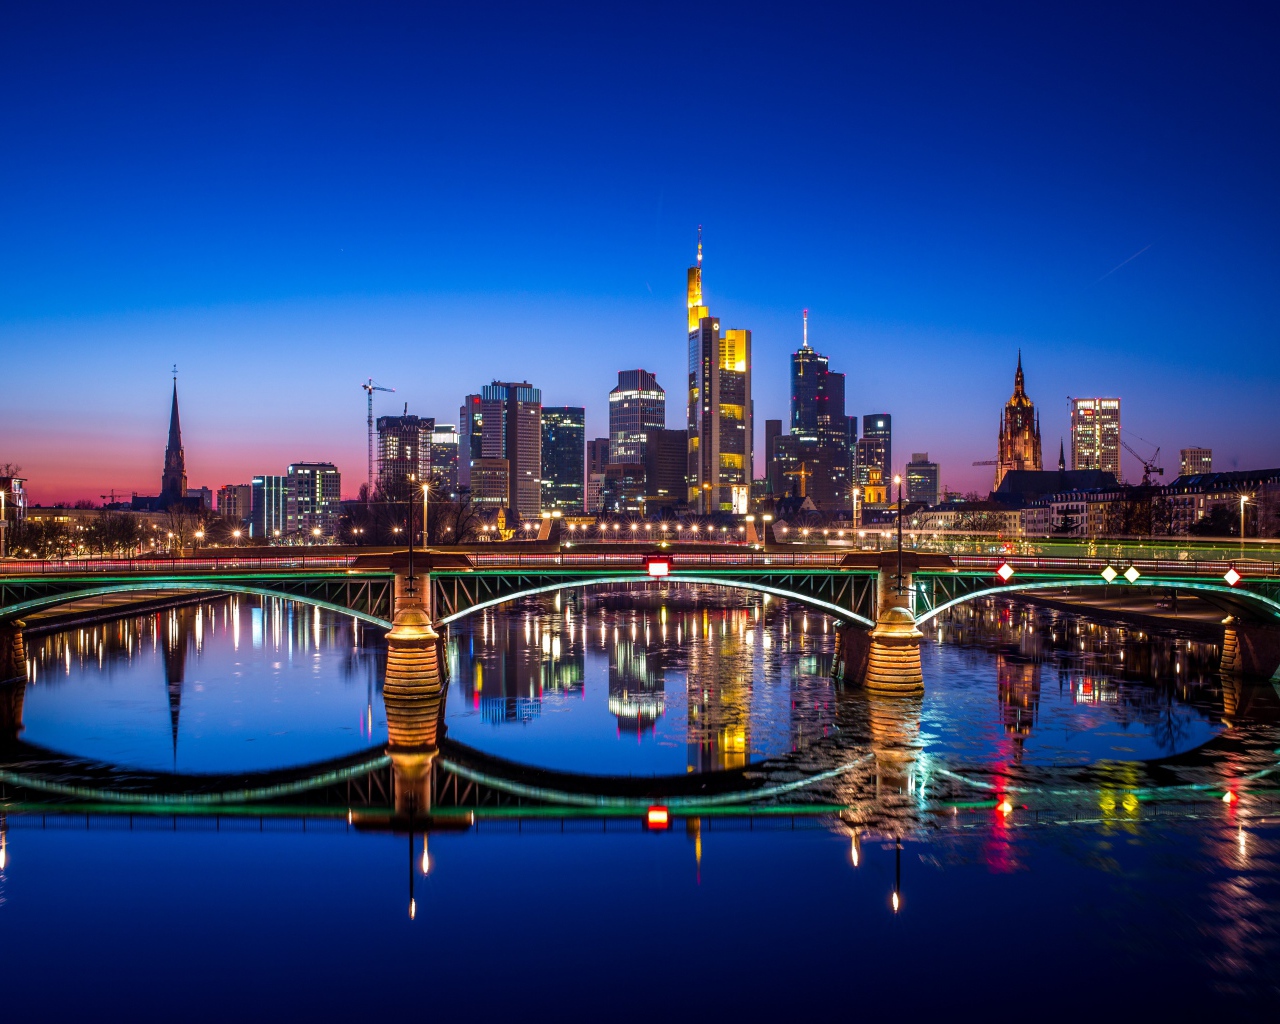 The night city of Frankfurt is reflected in the water, Germany